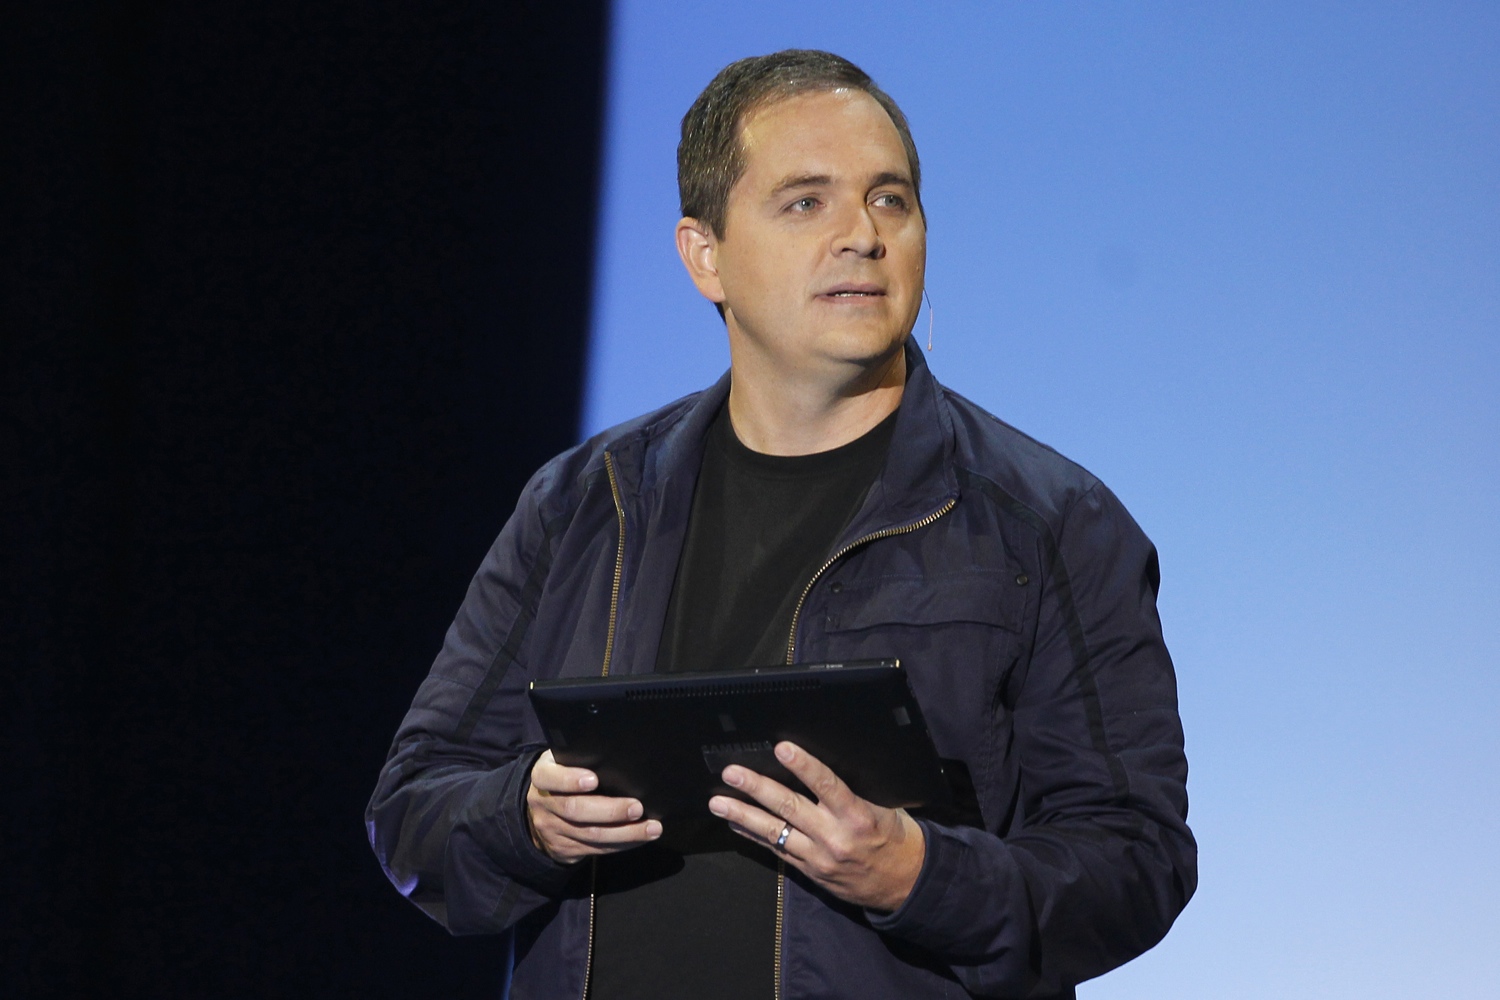 Whitten, head of Xbox Live, demonstrates new XBox feature XBox SmartGlass, at Microsoft XBox news briefing during E3 game expo in Los Angeles